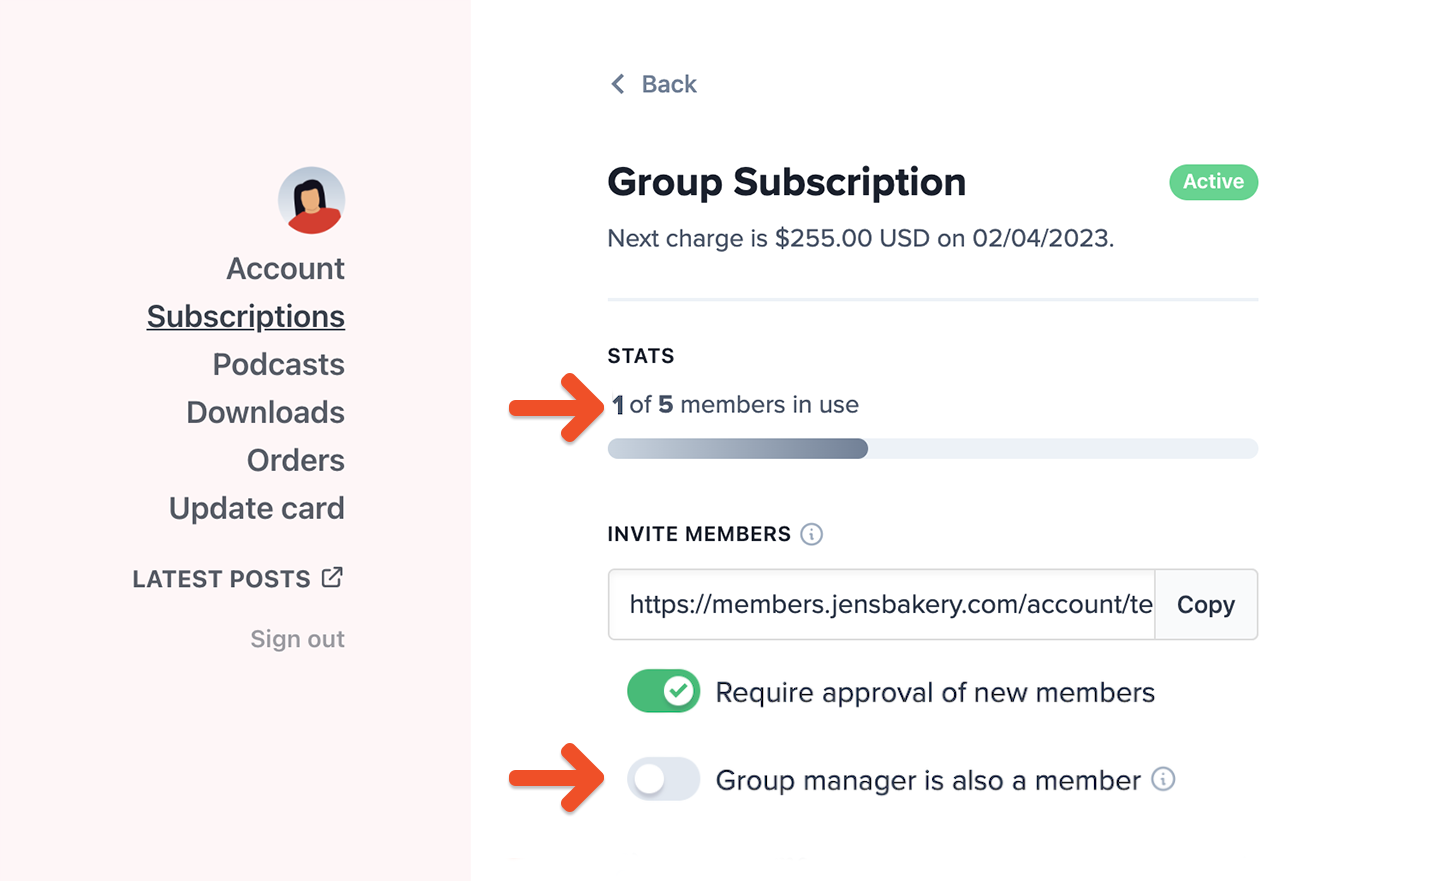 Group manager is also a member toggled off